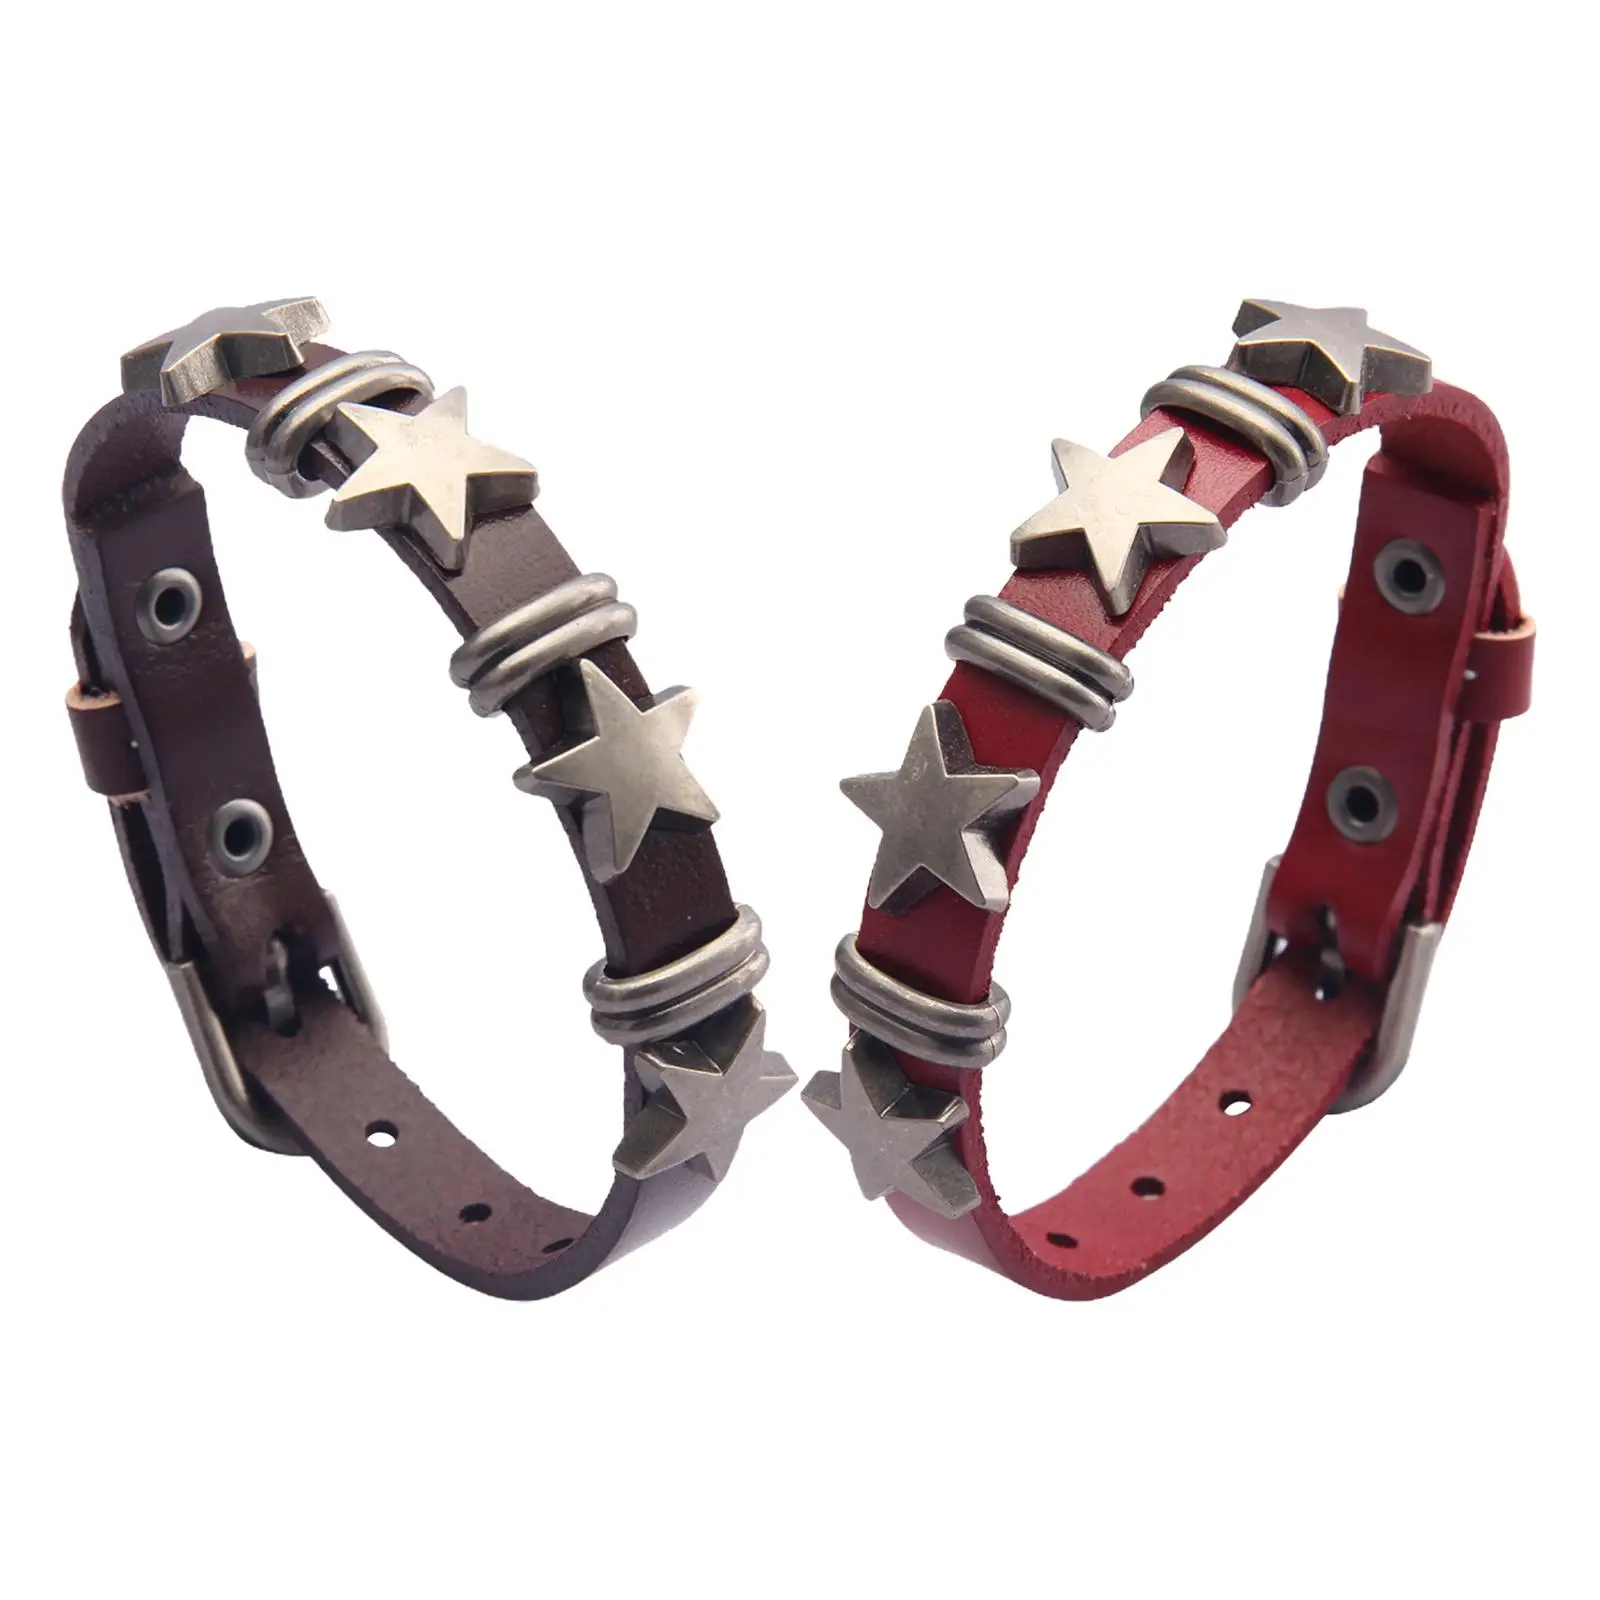 Star PU Leather Bracelet Adjustable Fashion Buckle Rock Punk Gothic Gift Accessories Alloy Cuff Bangle for Women Men Teen